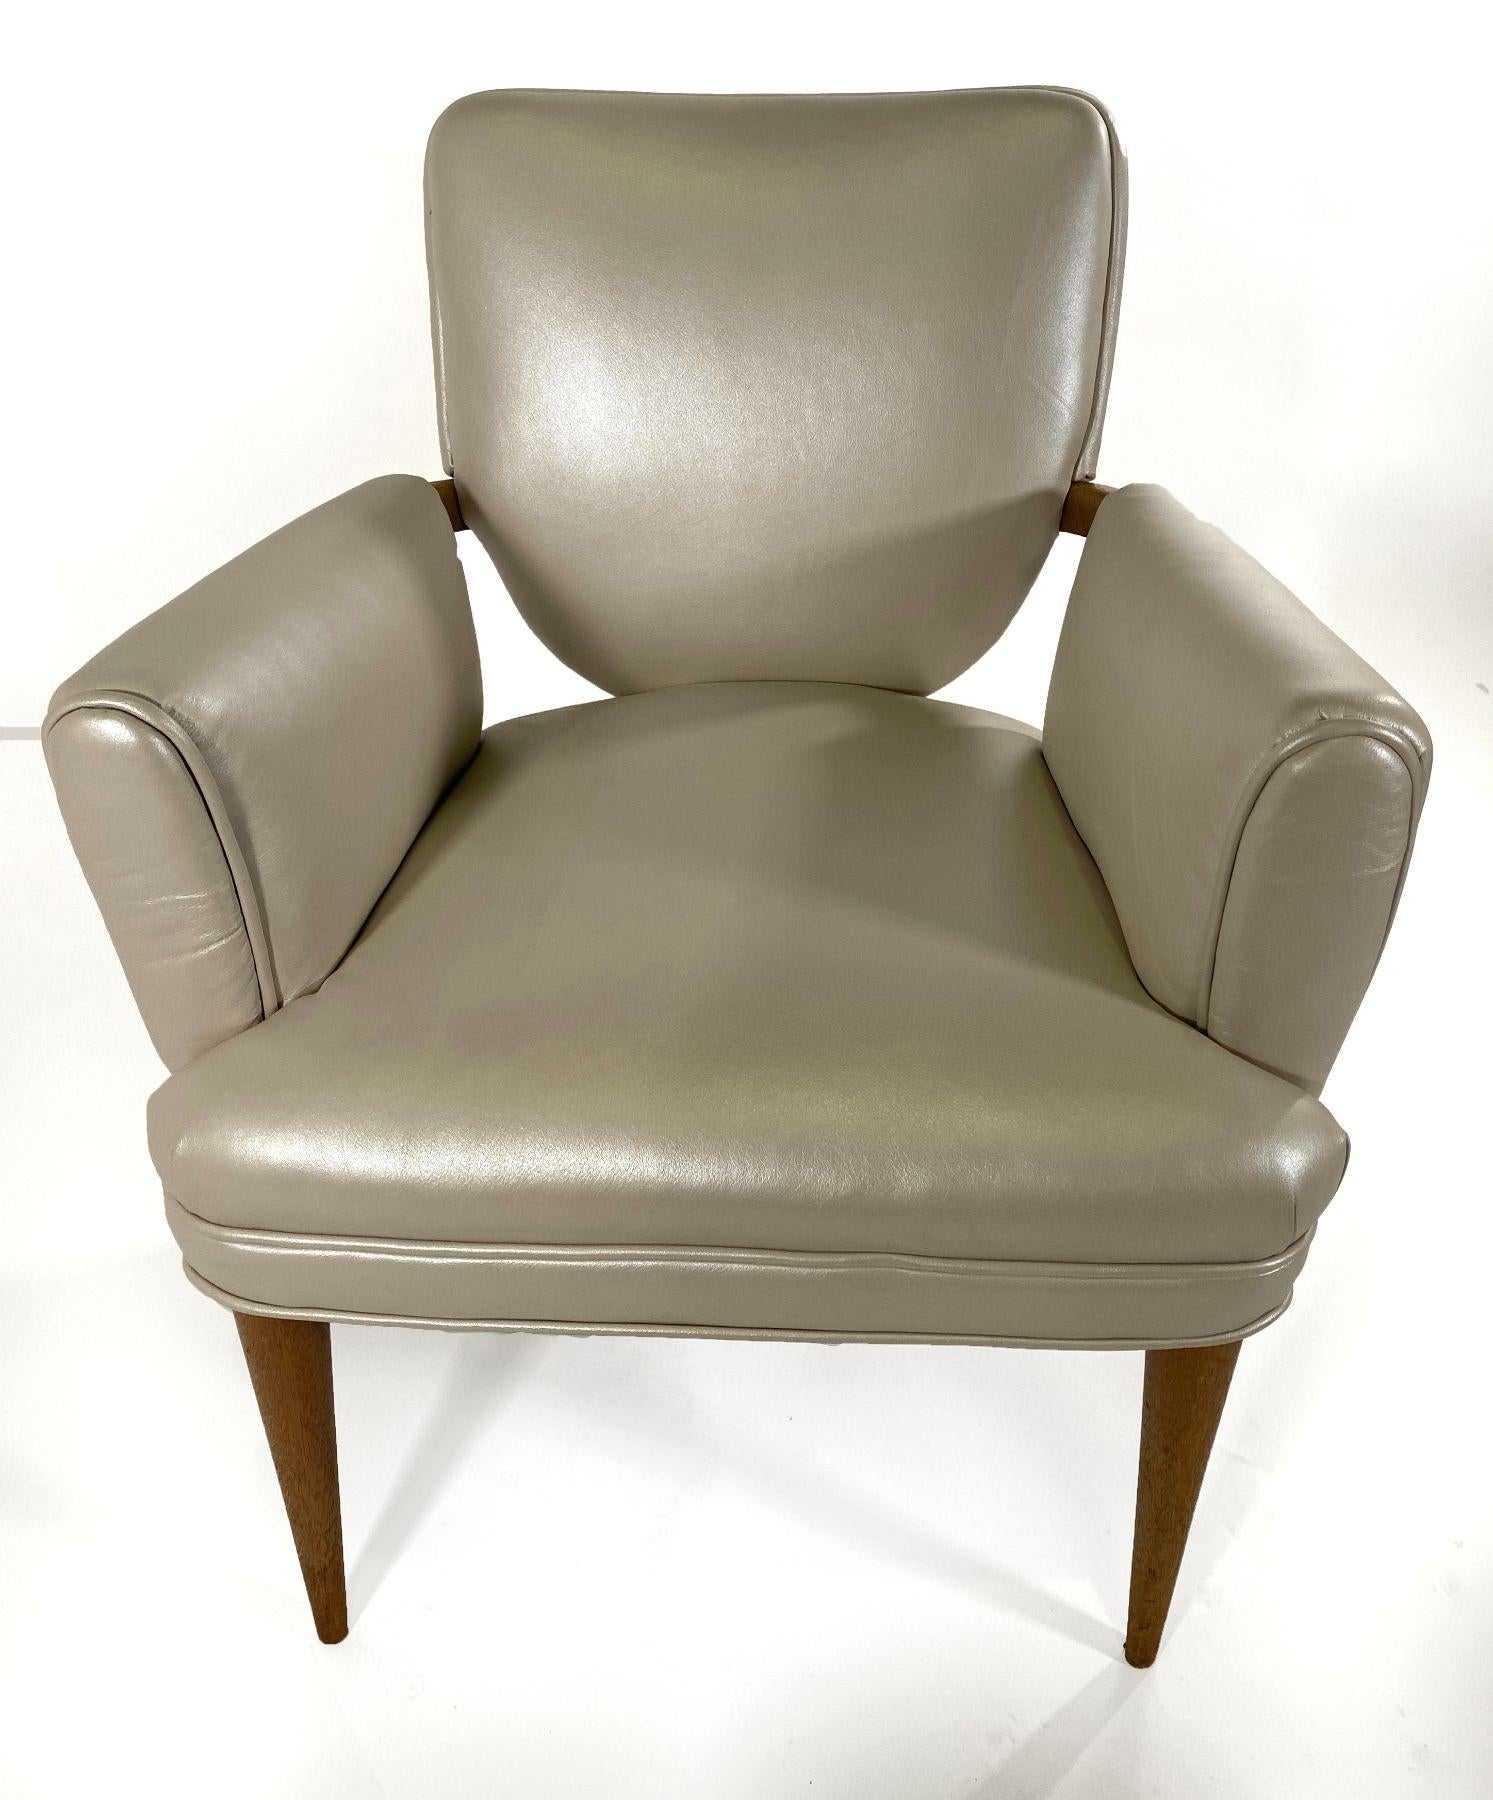 American Modern Bleached Mahogany and Leather Armchair, Paul Frankl In Good Condition For Sale In Hollywood, FL